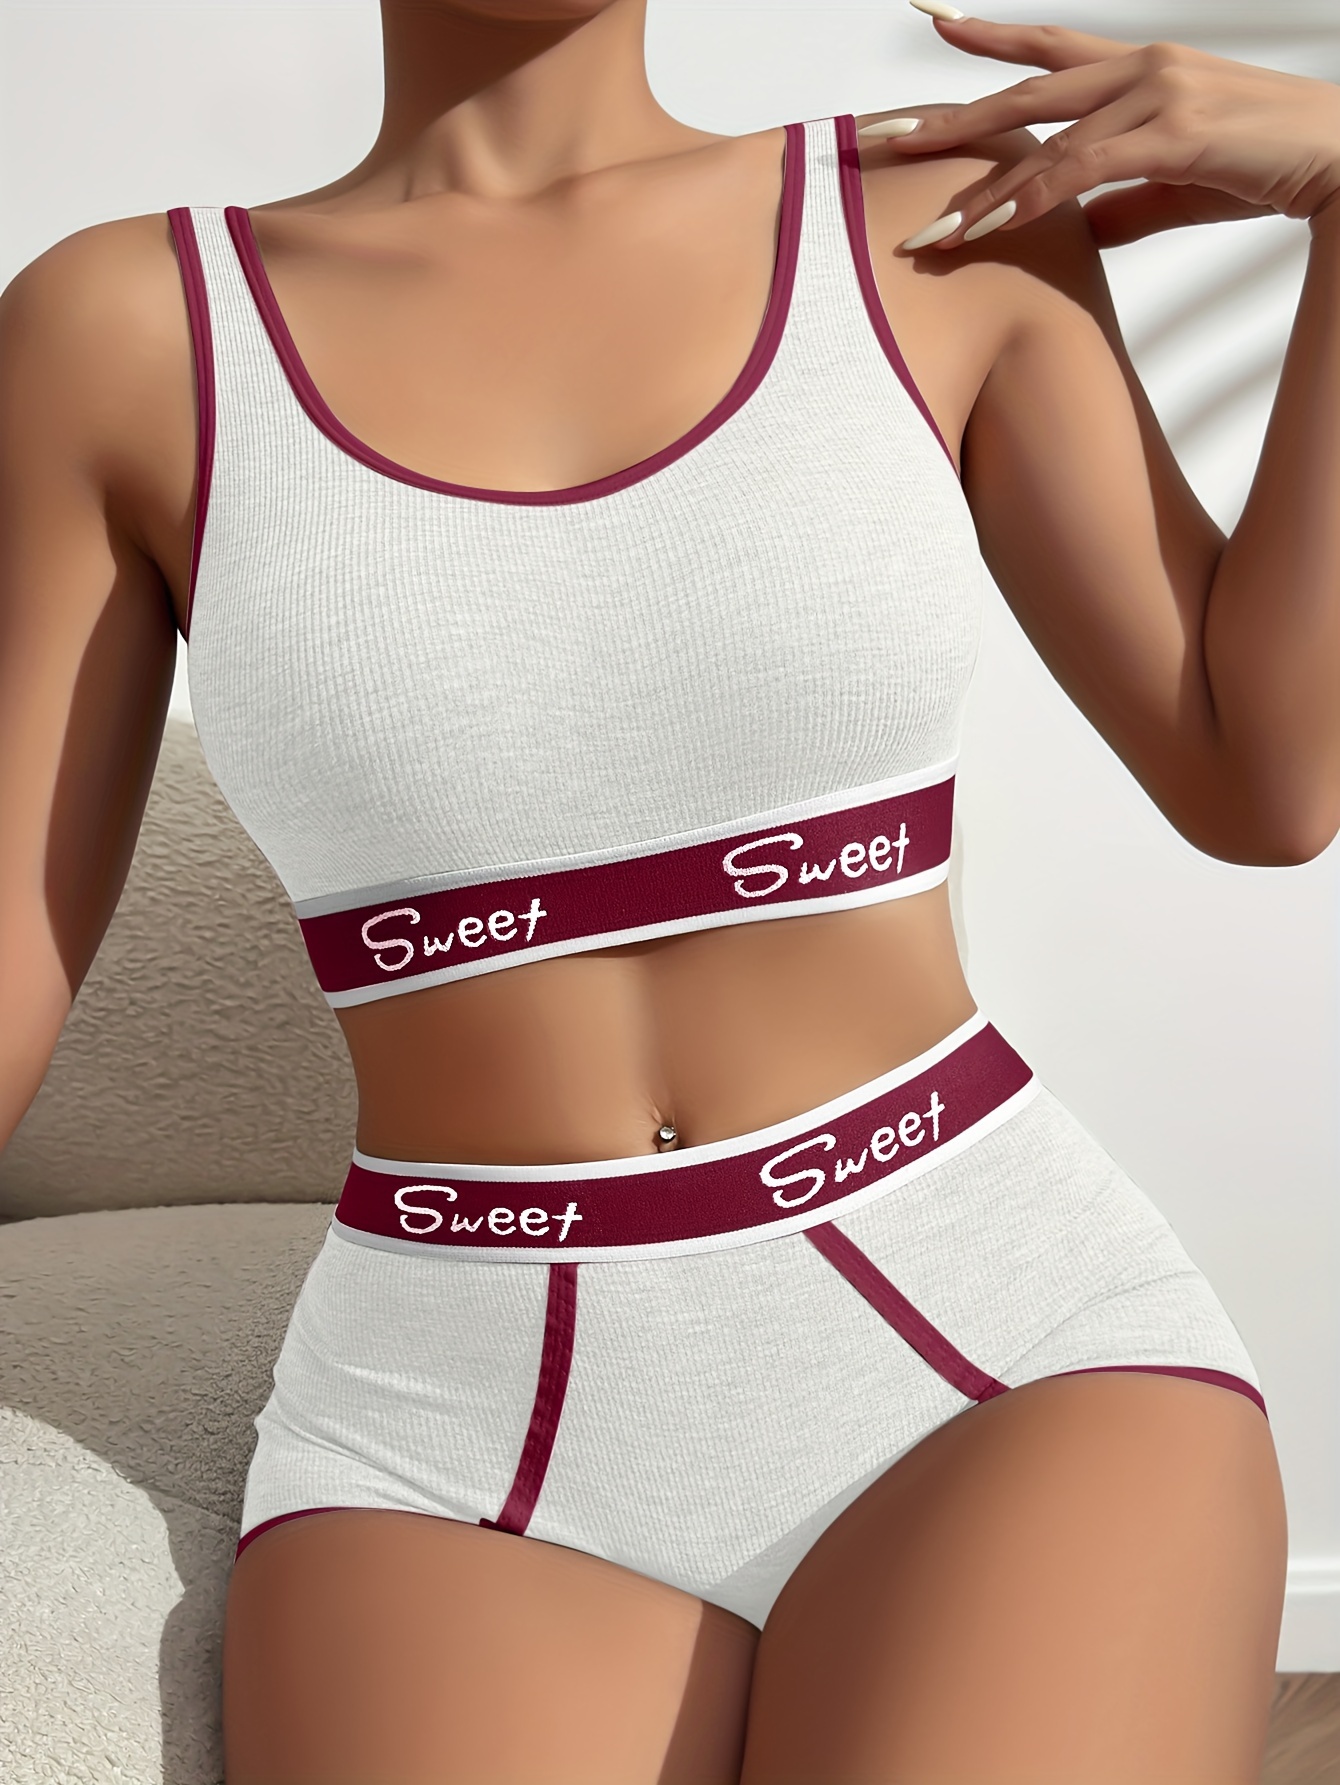 Ladies' Sports Bra and Briefs Sets Ringless Letter Printed Lingerie Sets  for Women - China Lingerie and Underwear price